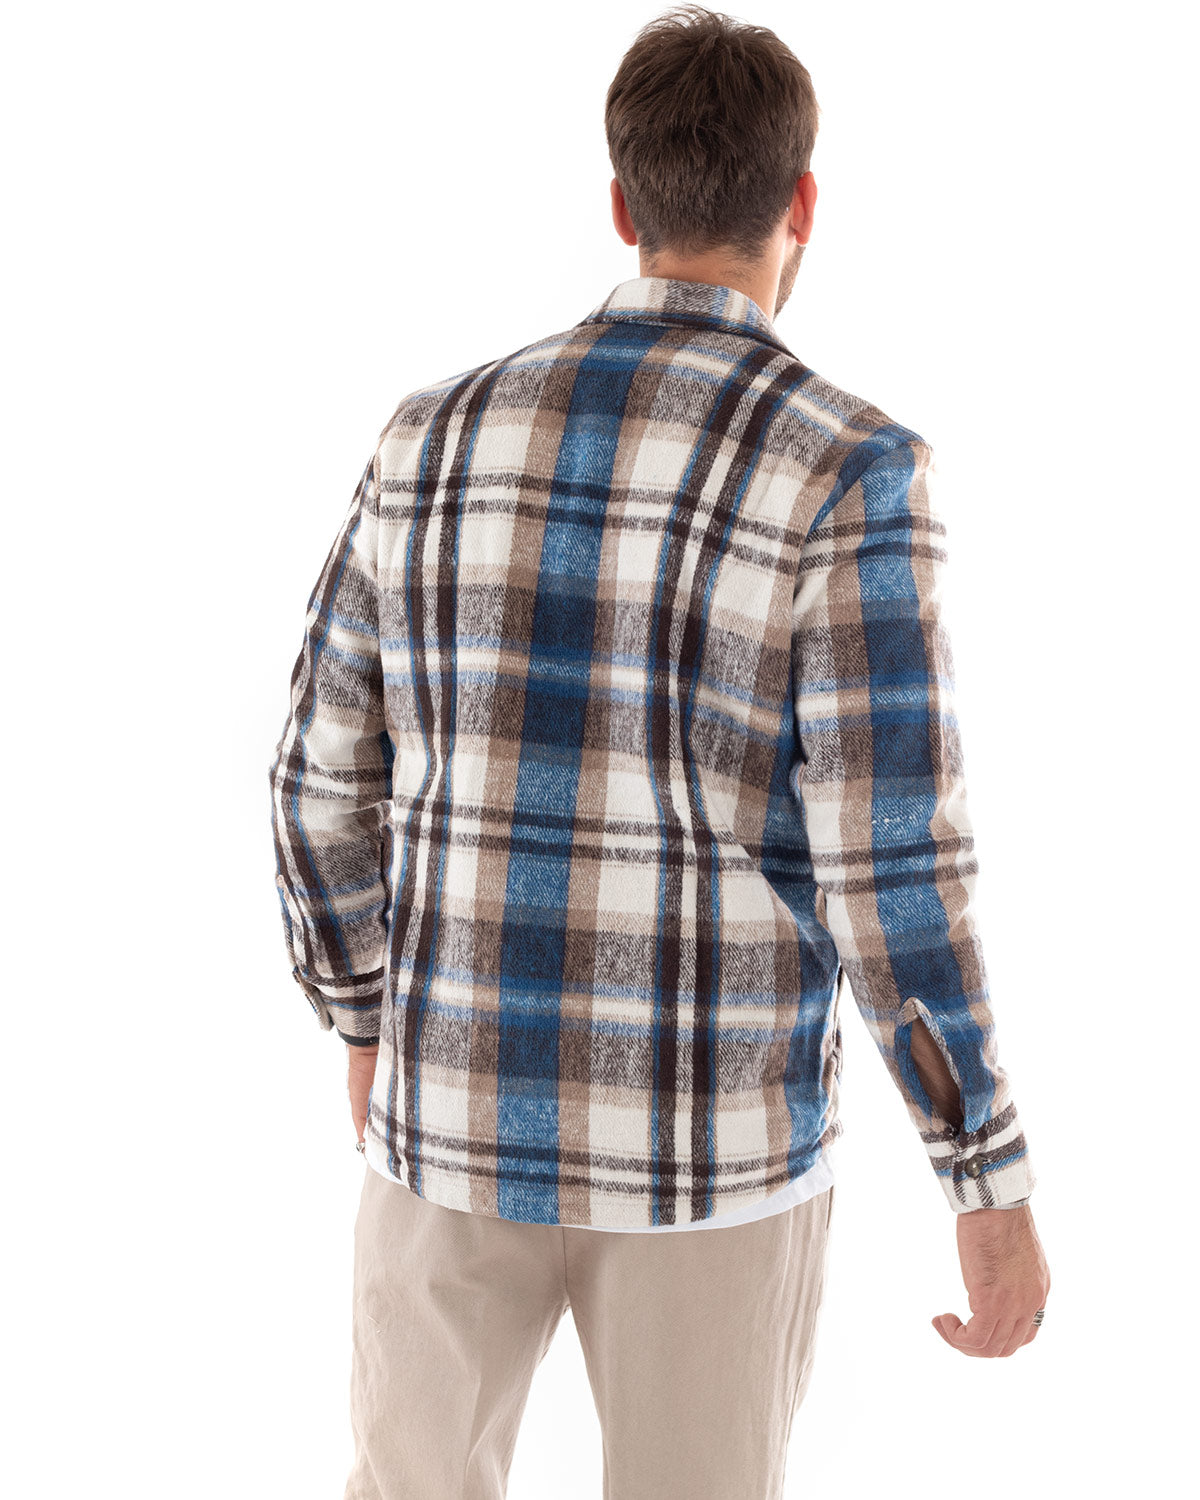 Men's Jacket Coat Shirt Shirt With Casual Collar Checked Pattern Blue GIOSAL-G2922A